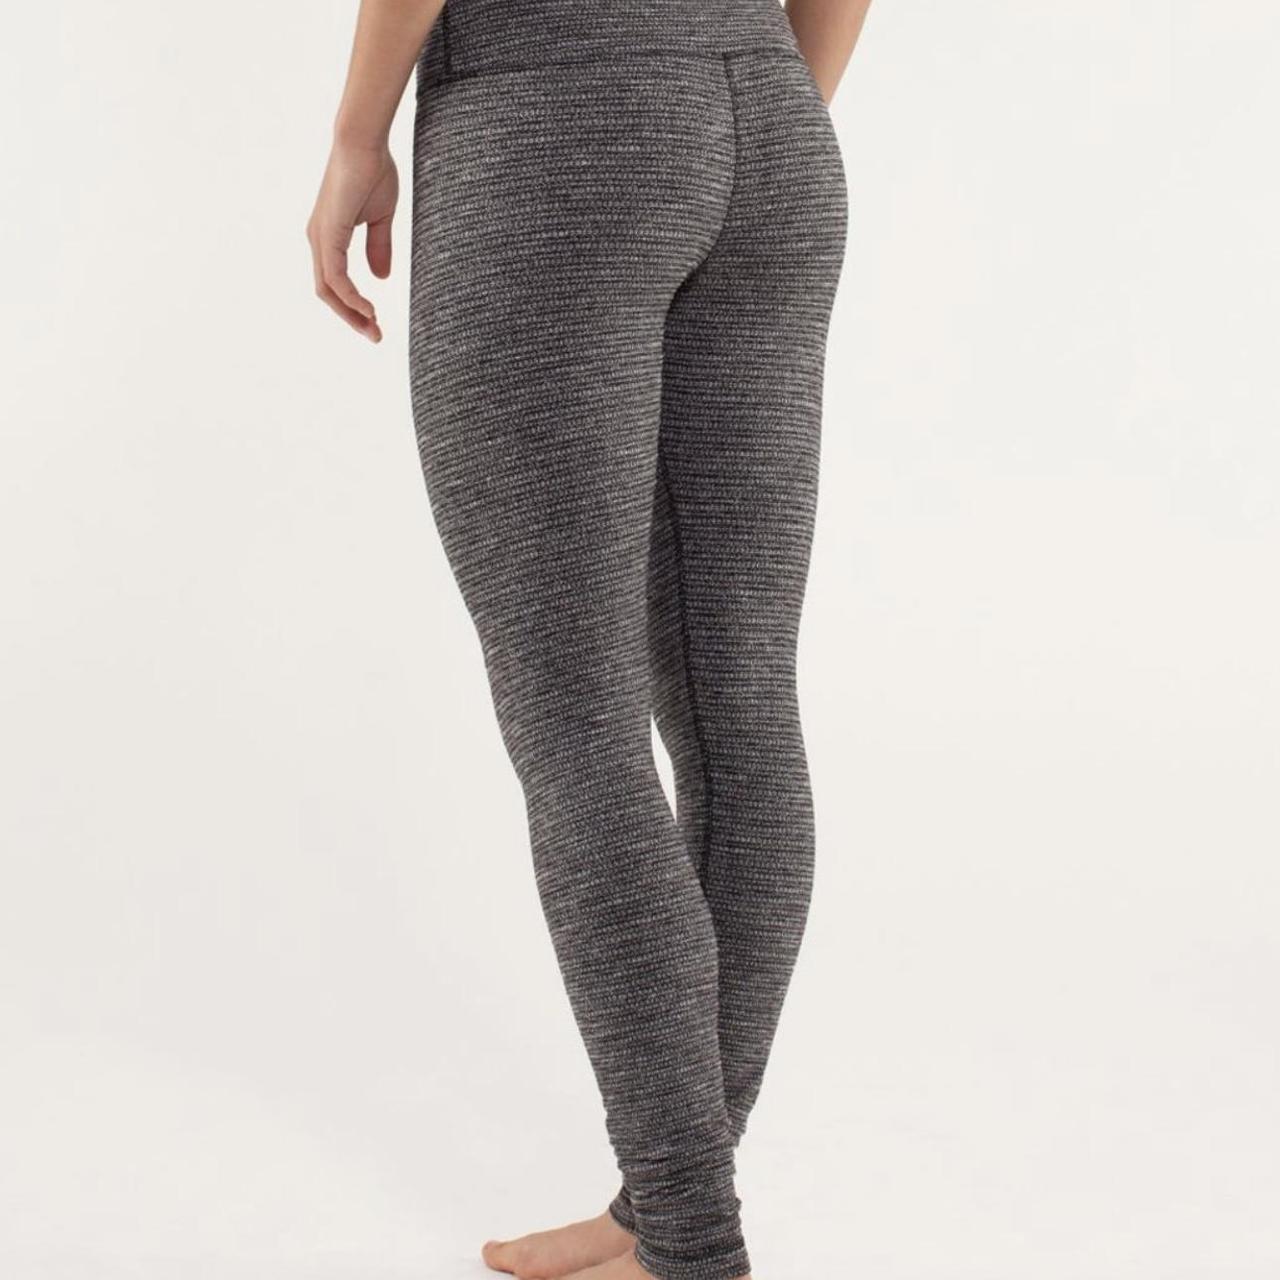 Lululemon Black and White Wunder Under High-Rise Tights - Athletic apparel